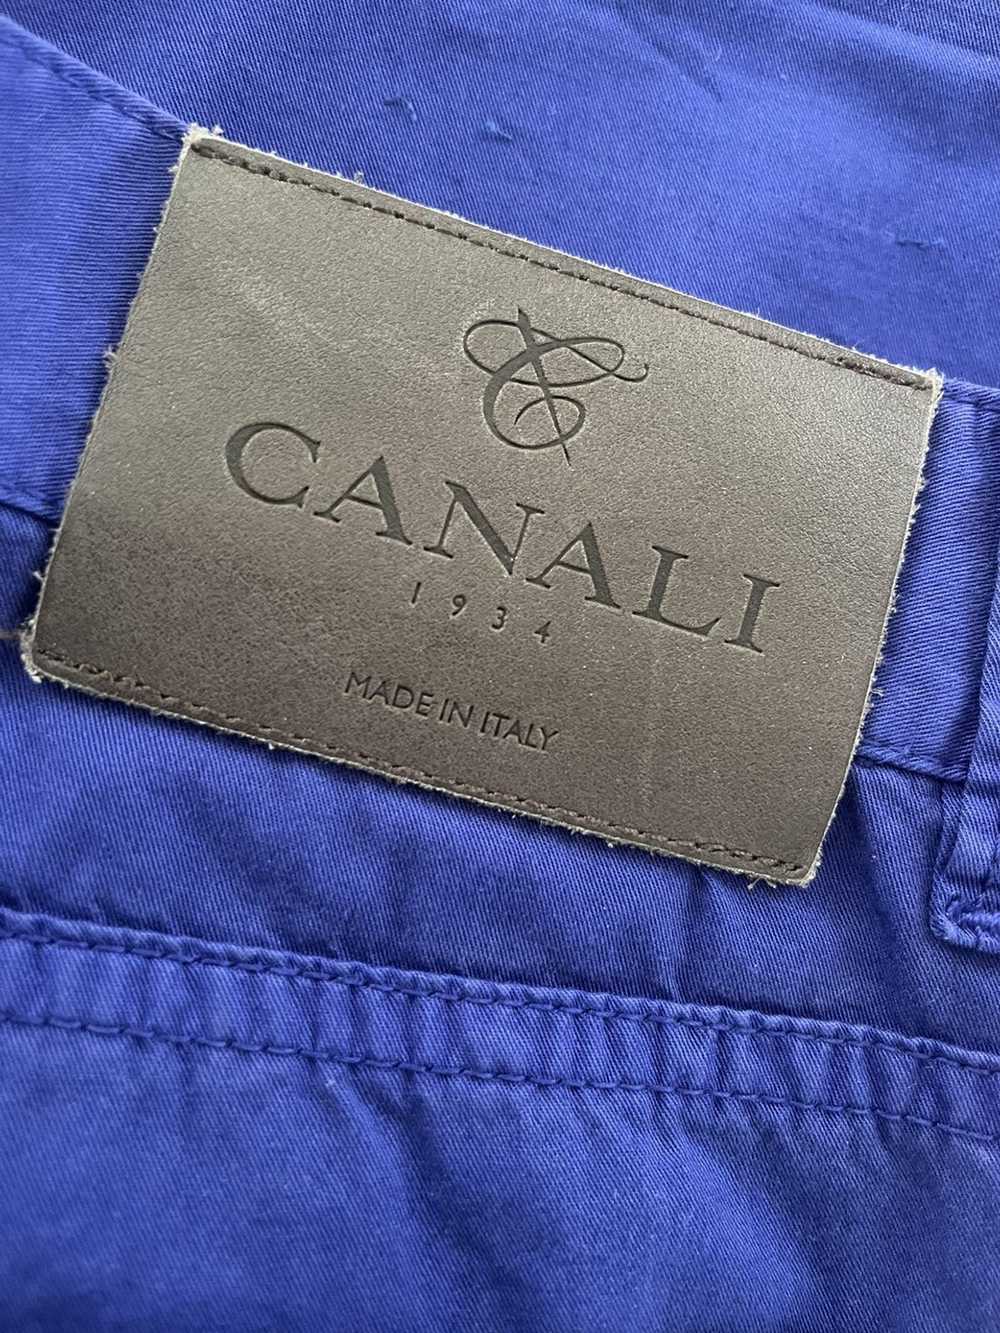 Canali Canali mens pants 48 made in Italy navy - image 11